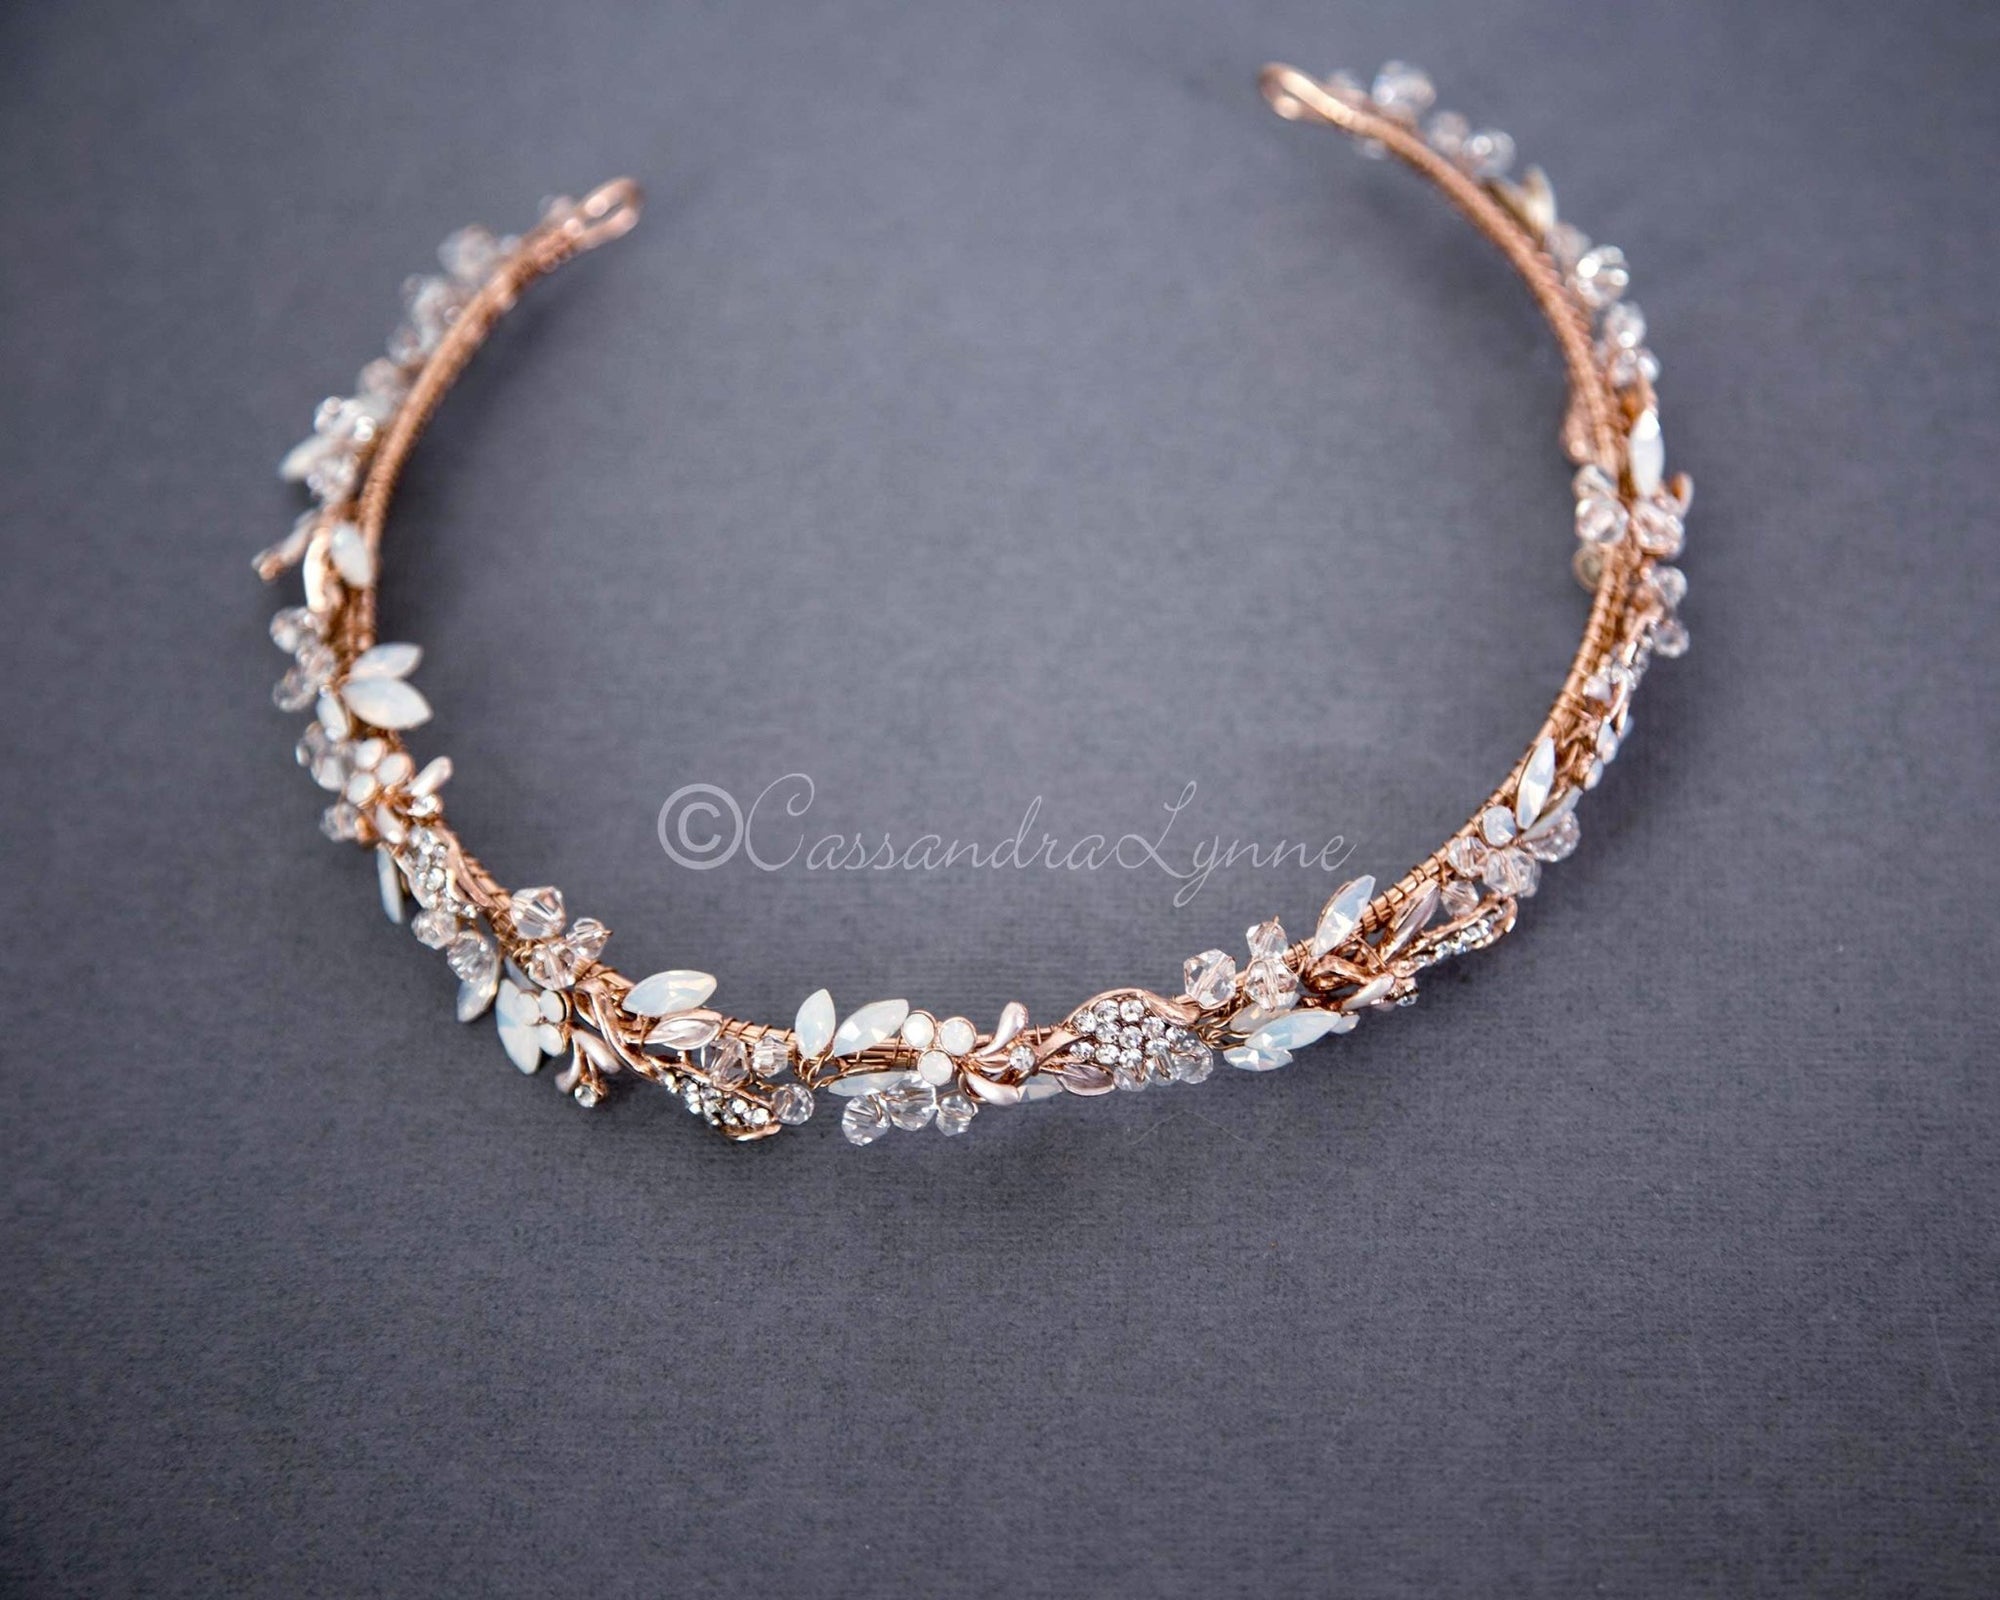 Headband in Rose Gold with Opal Crystals - Cassandra Lynne